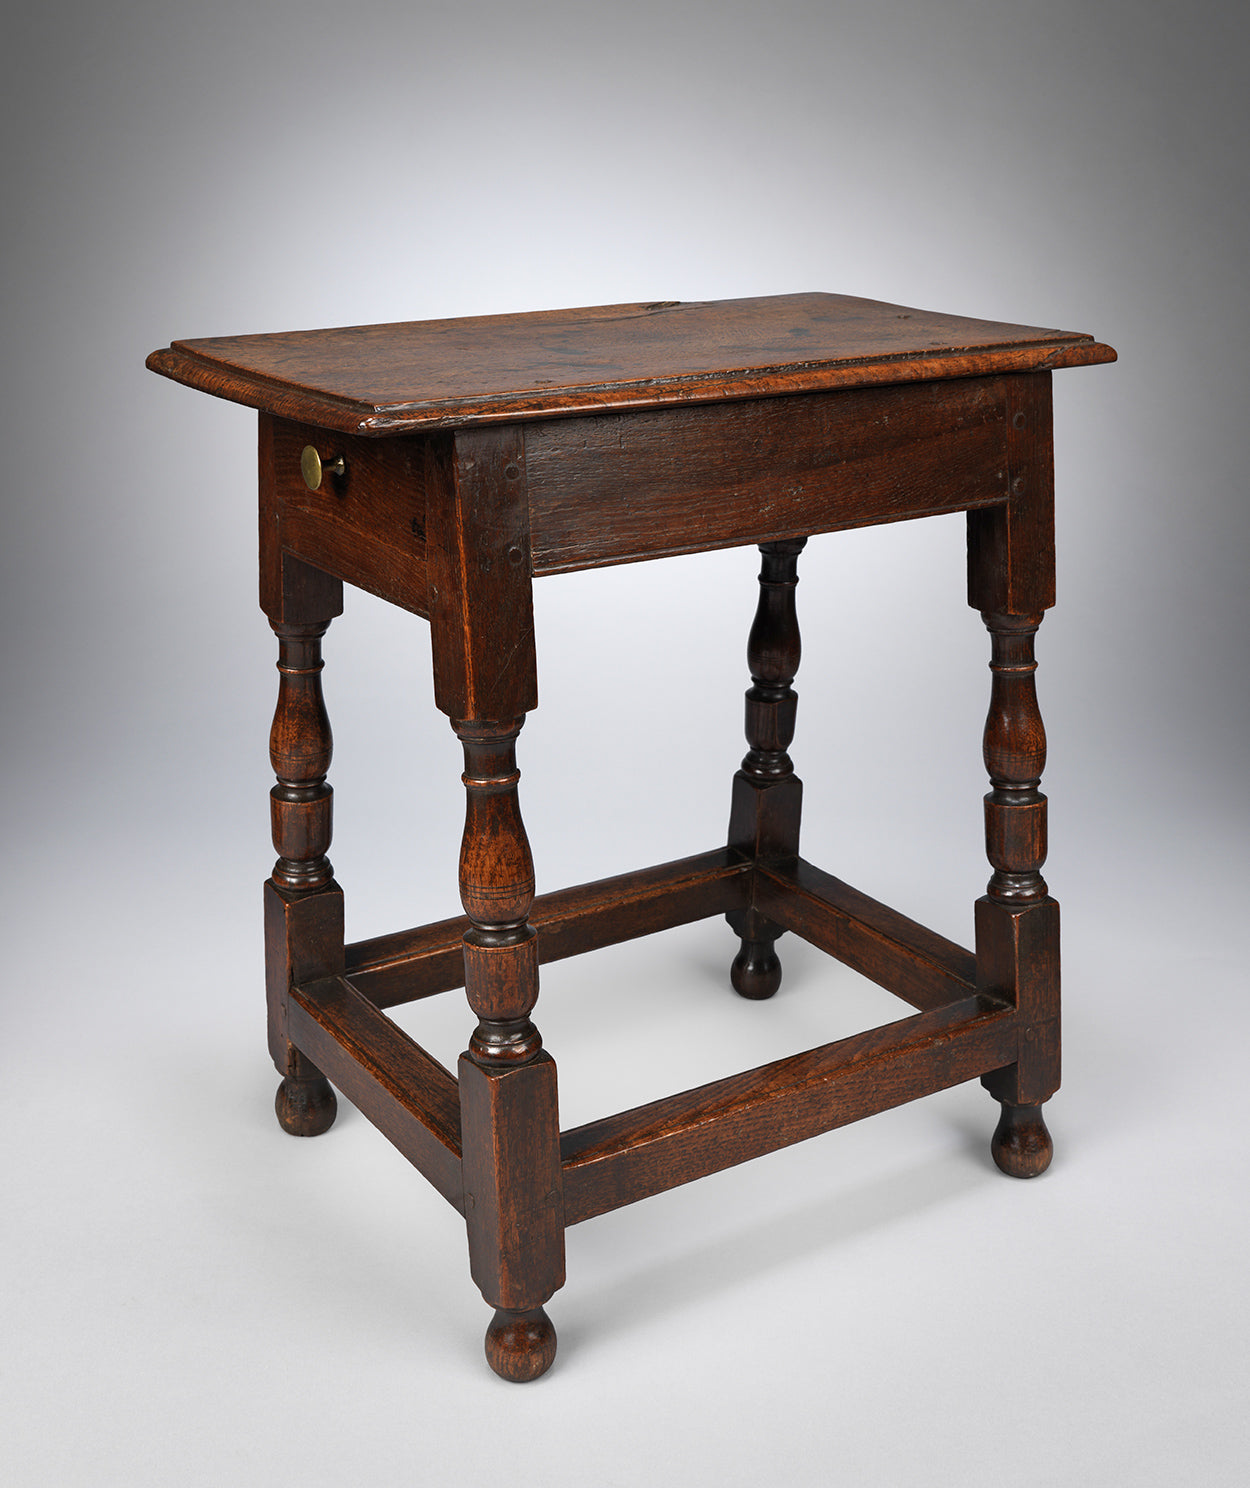 A Most Unusual Queen Anne Joint Stool Enclosing a Drawer